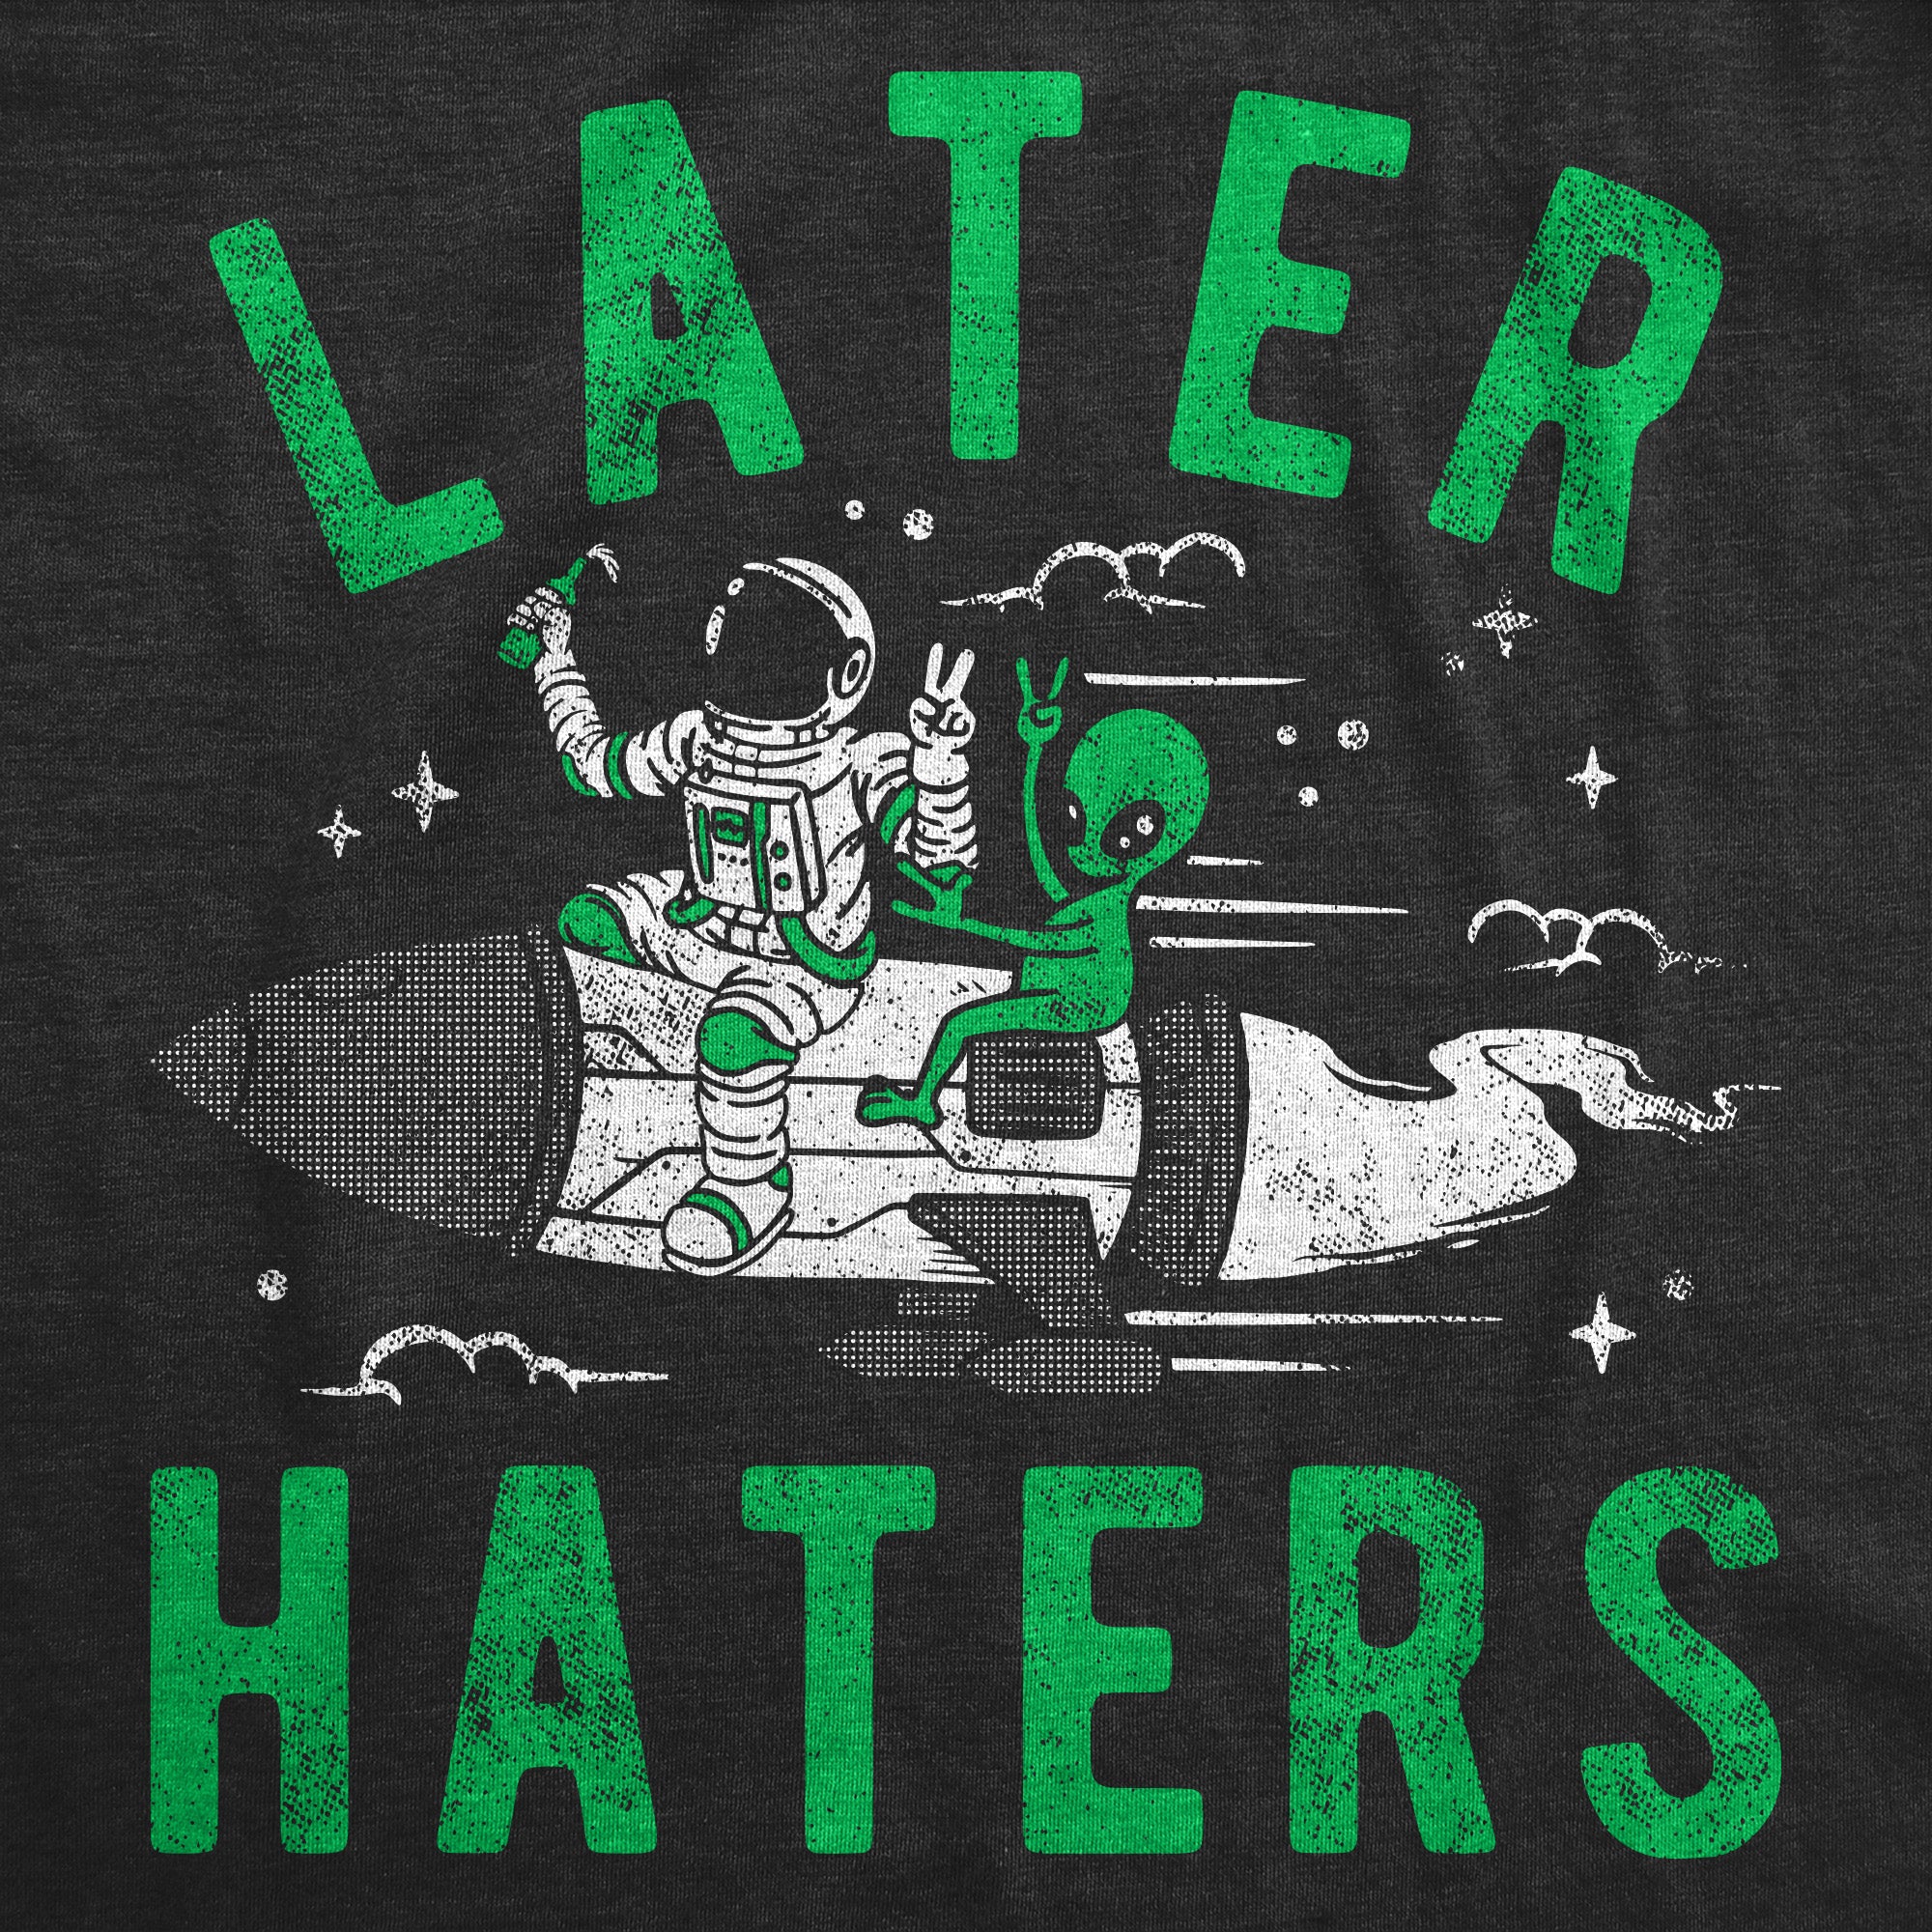 Funny Heather Black - Later Haters Alien Later Haters Alien Womens T Shirt Nerdy space sarcastic Tee